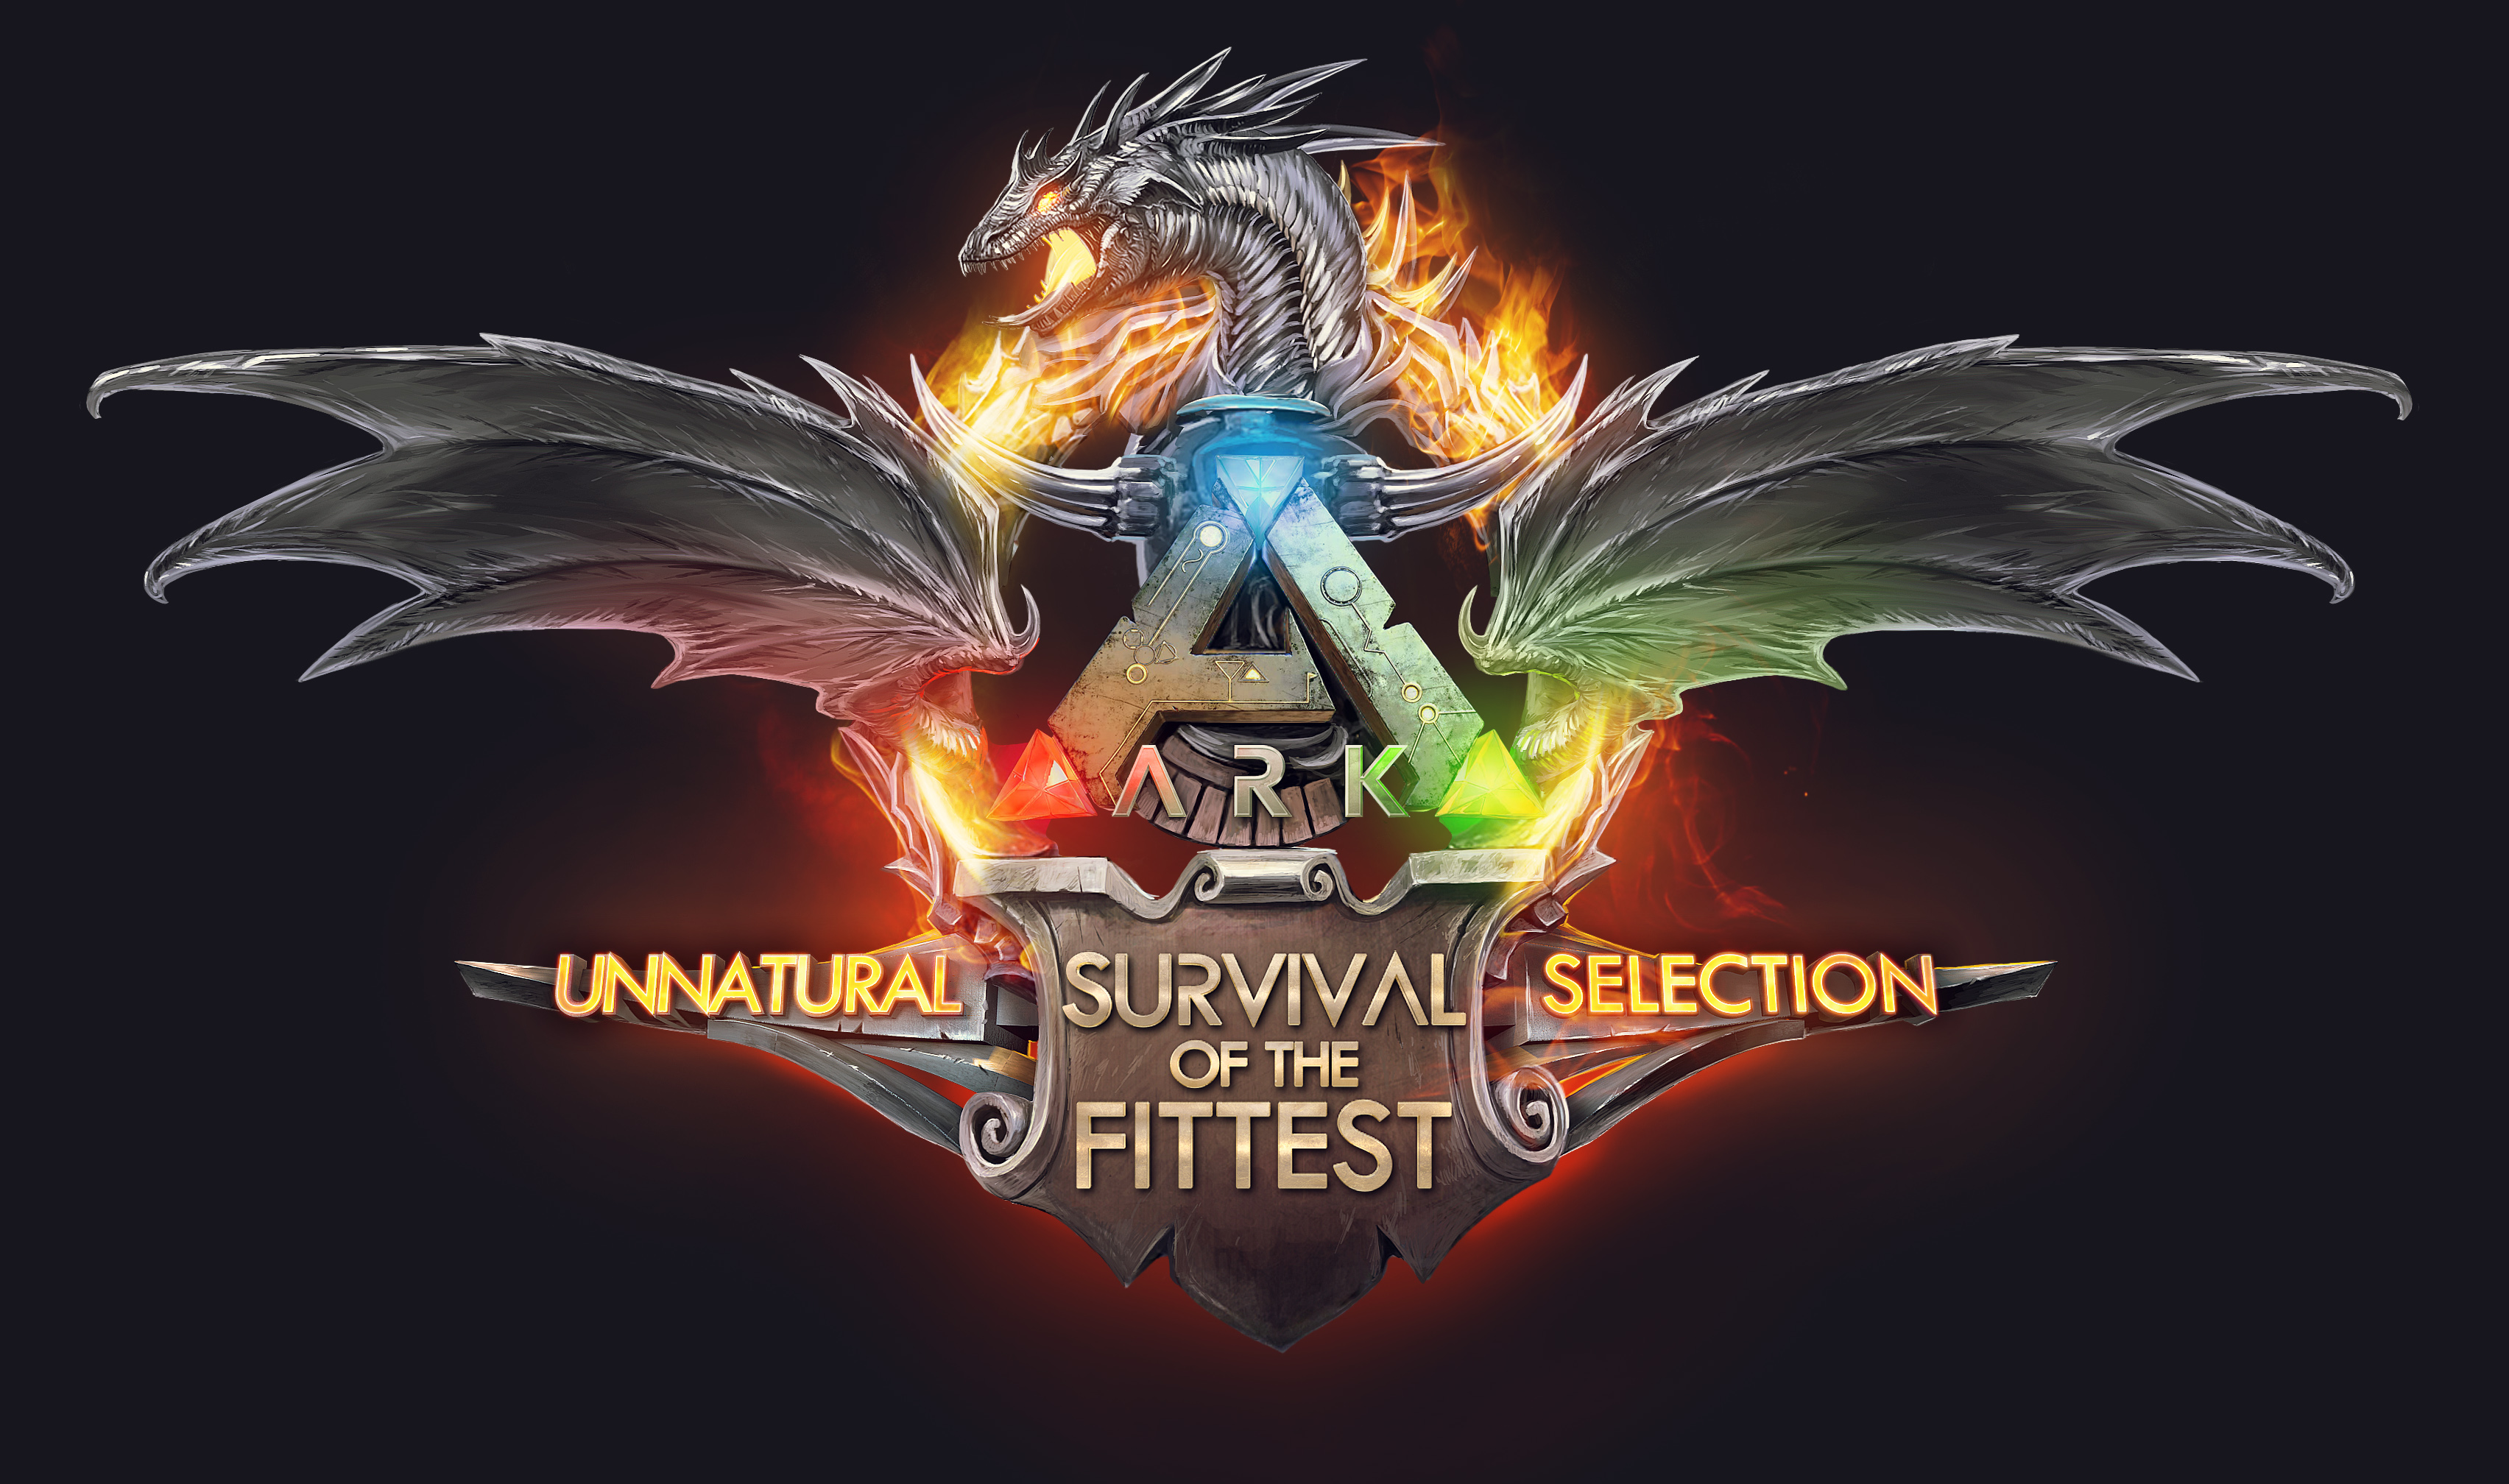 Ark: Survival of the Fittest com data na PS4